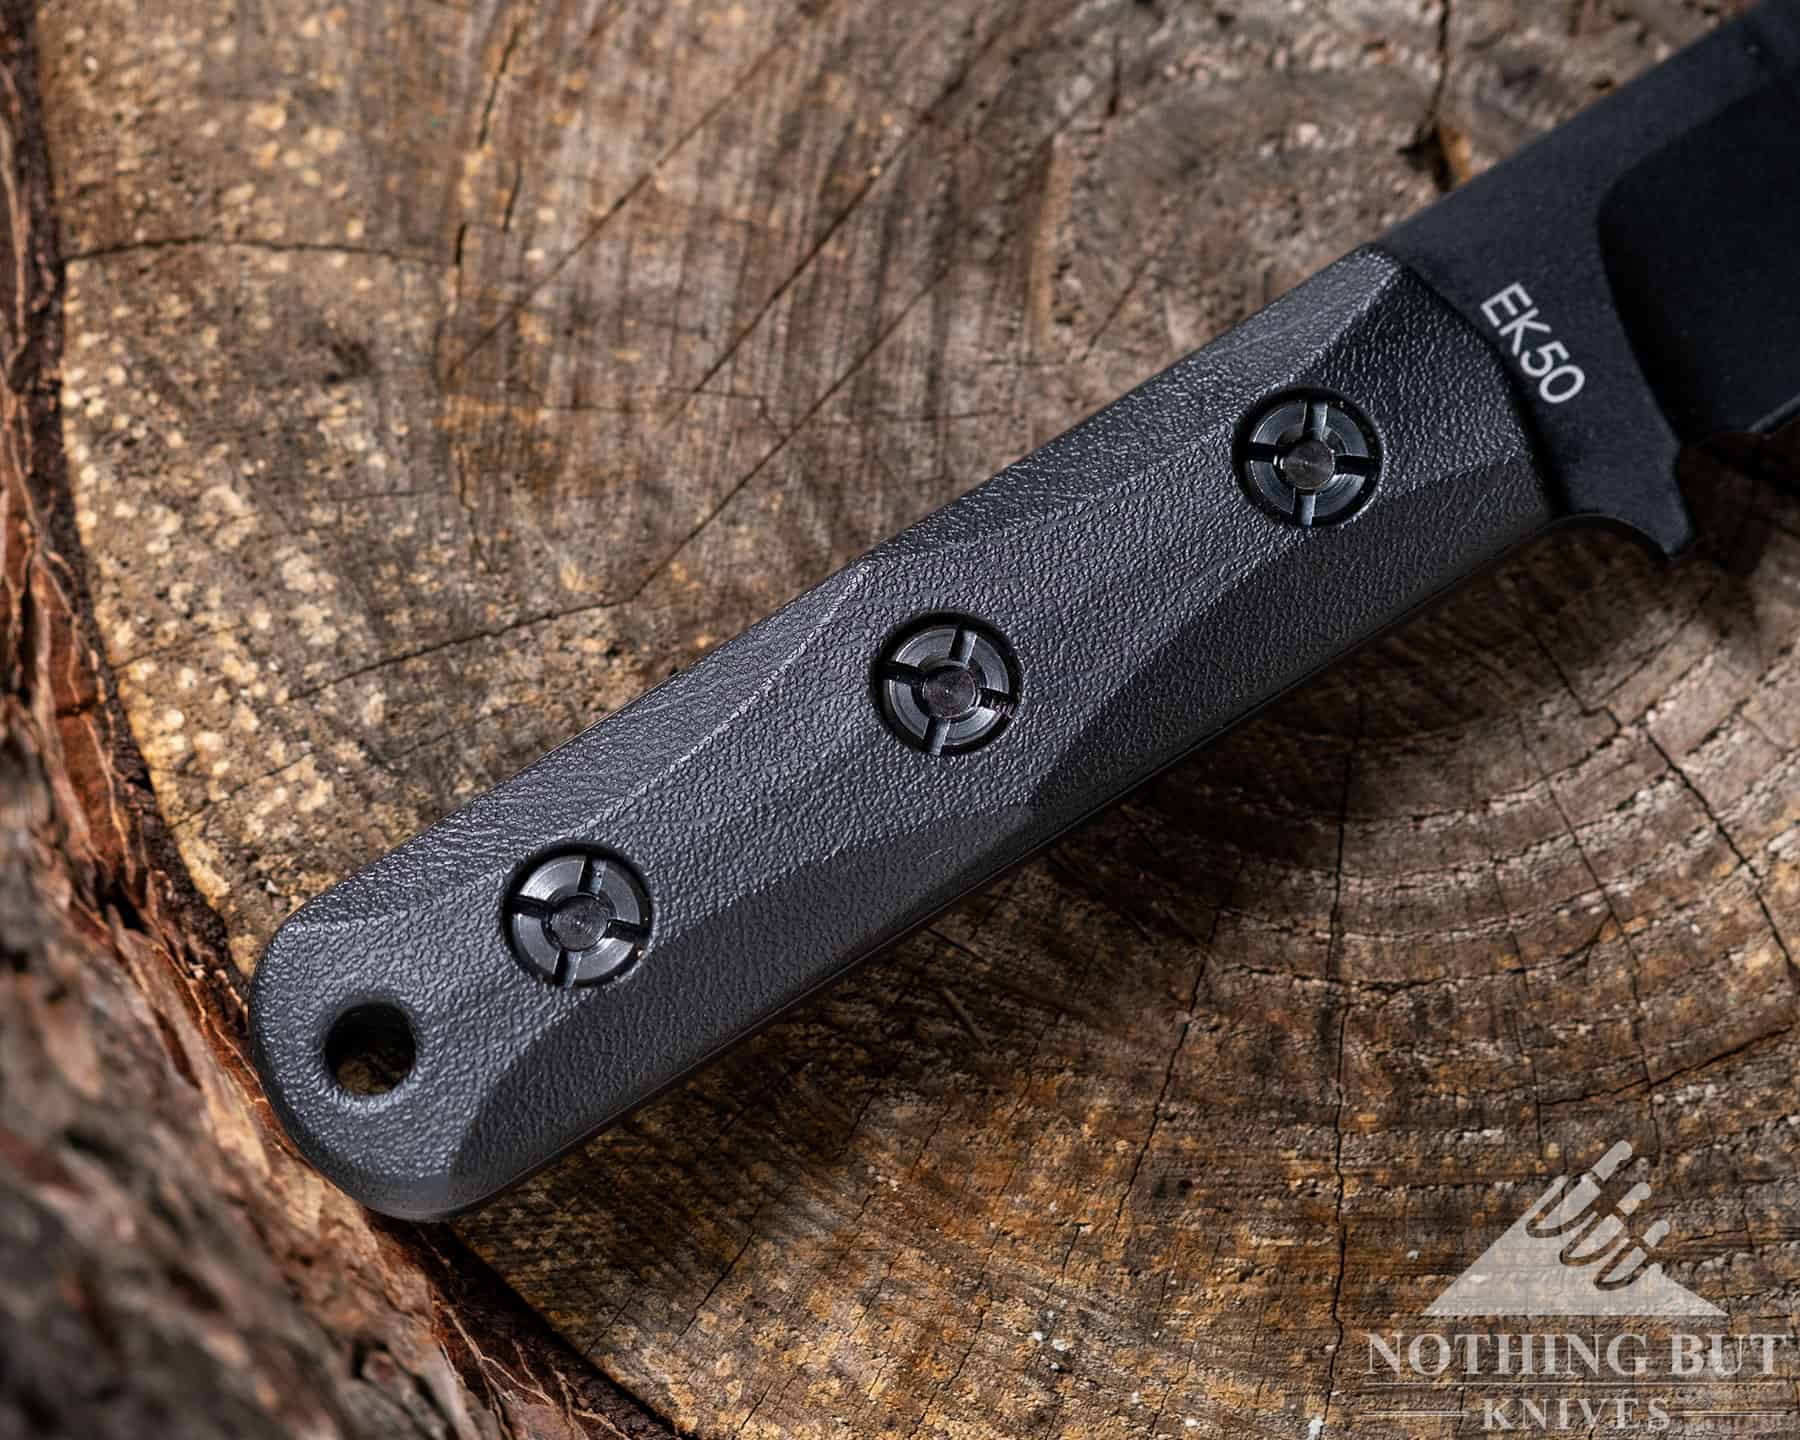 Modern Ek Commando knives have scalloped cuts that fit the hand and thumb exceptionally well.